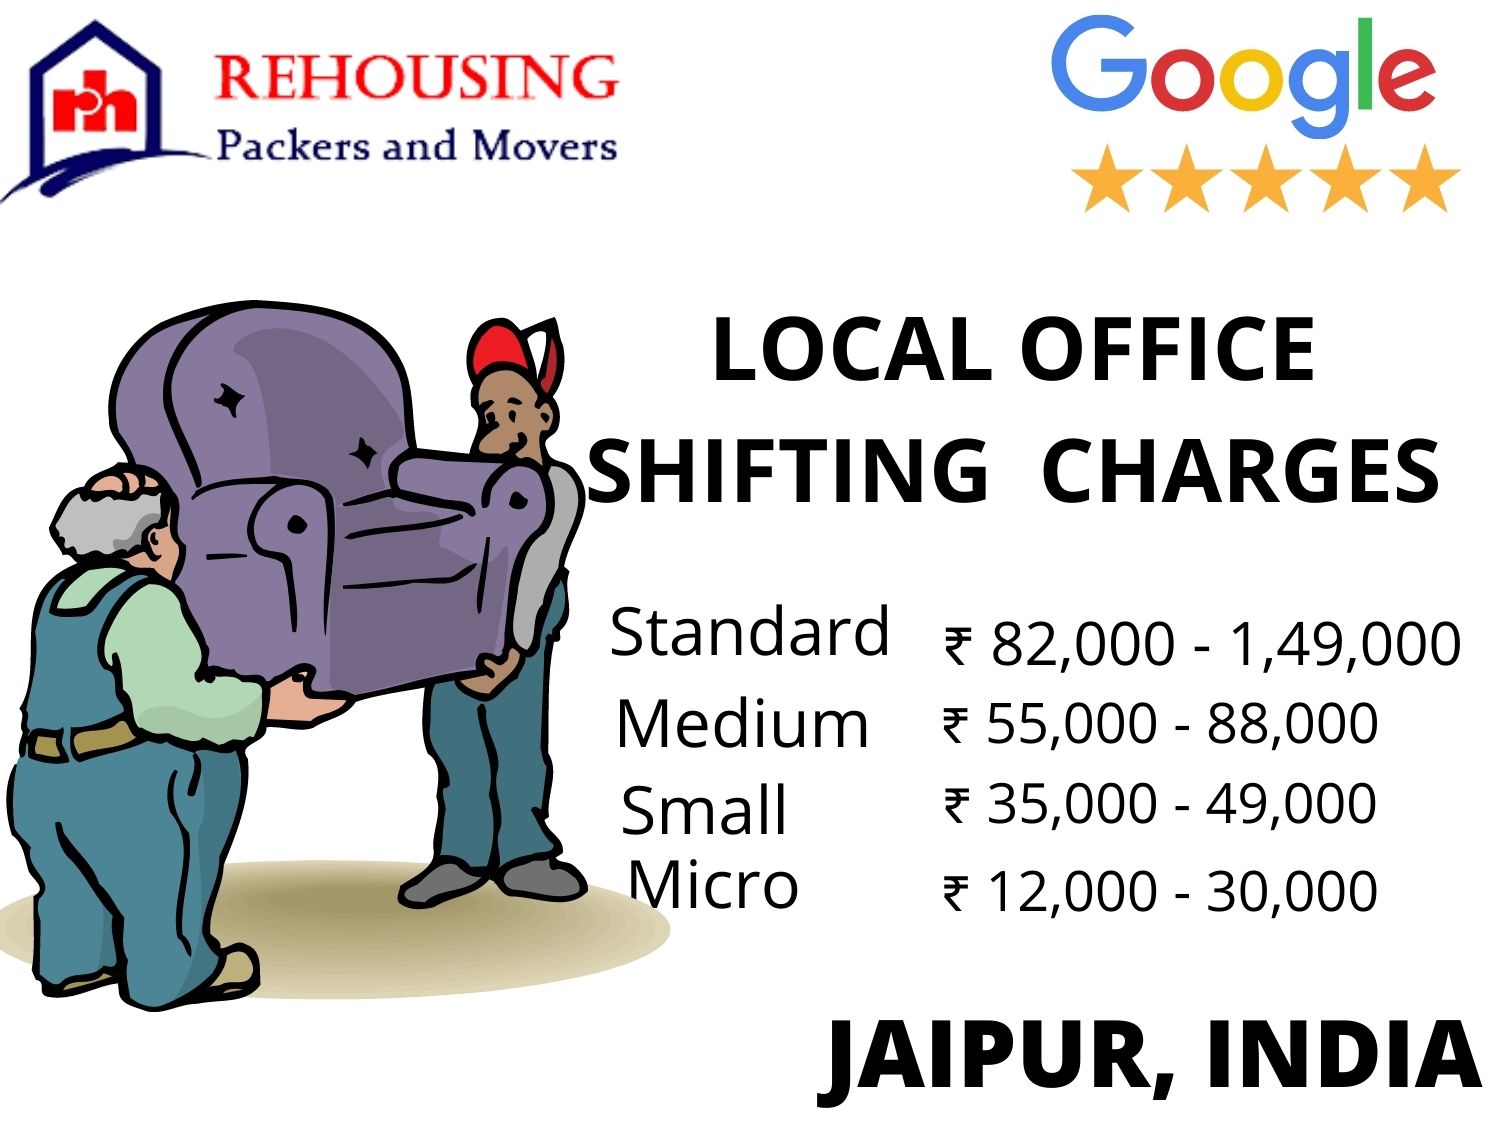 packers and movers charges in Jaipur are between Rs 1,000 and Rs 3,000 for transportation